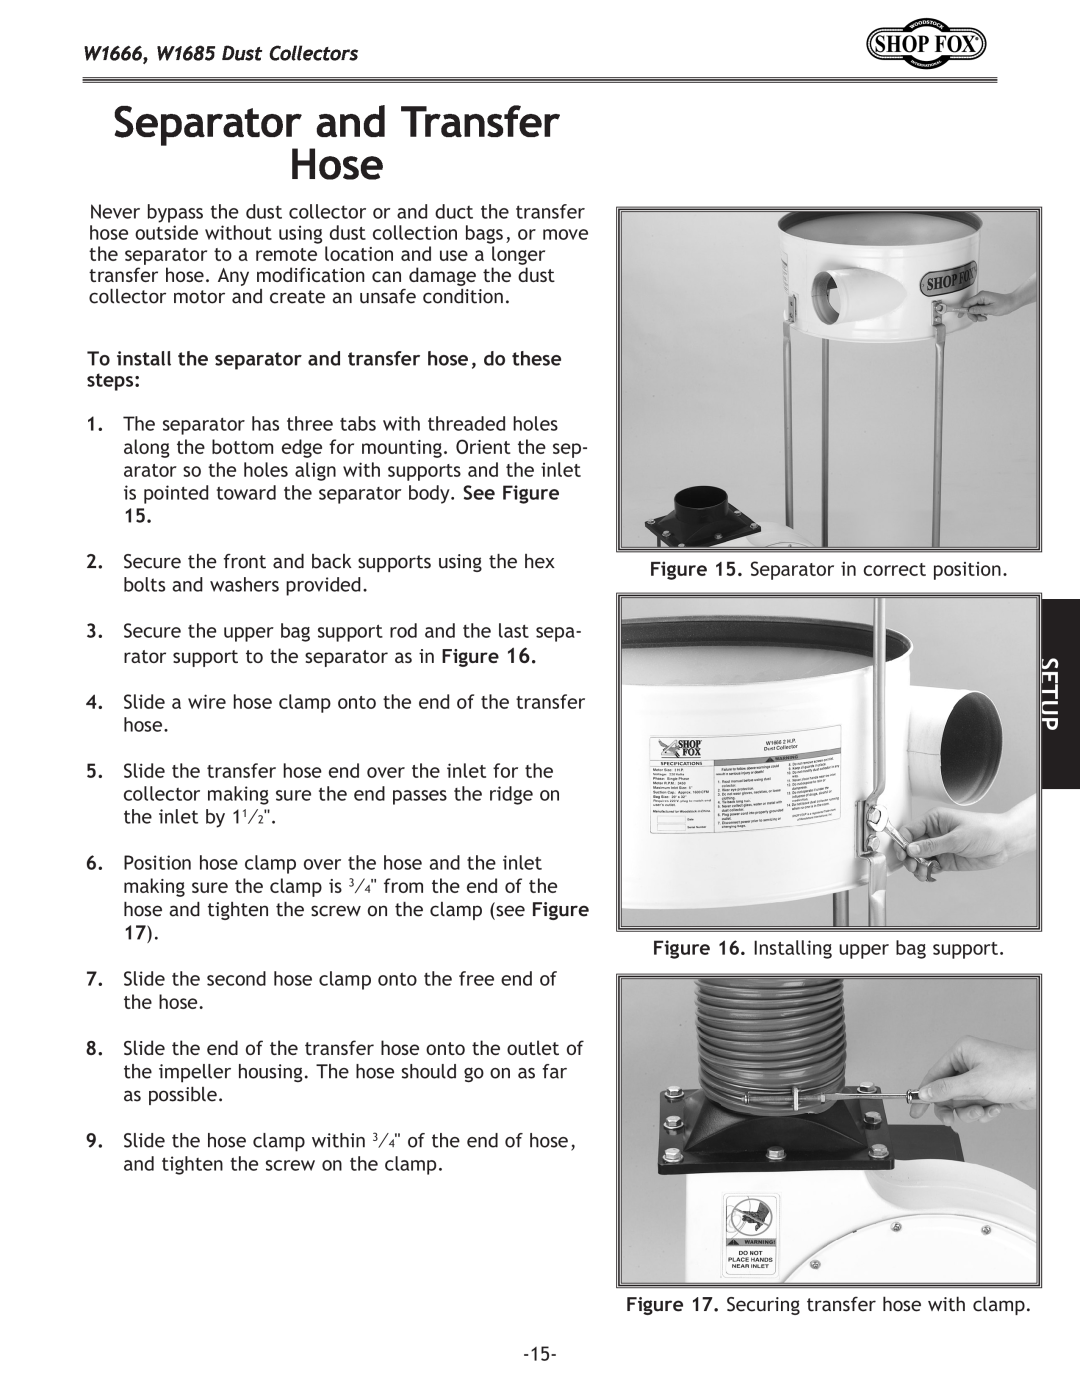 Woodstock DUST COLLECTORS instruction manual Separator and Transfer Hose, Setup, W1666, W1685 Dust Collectors 